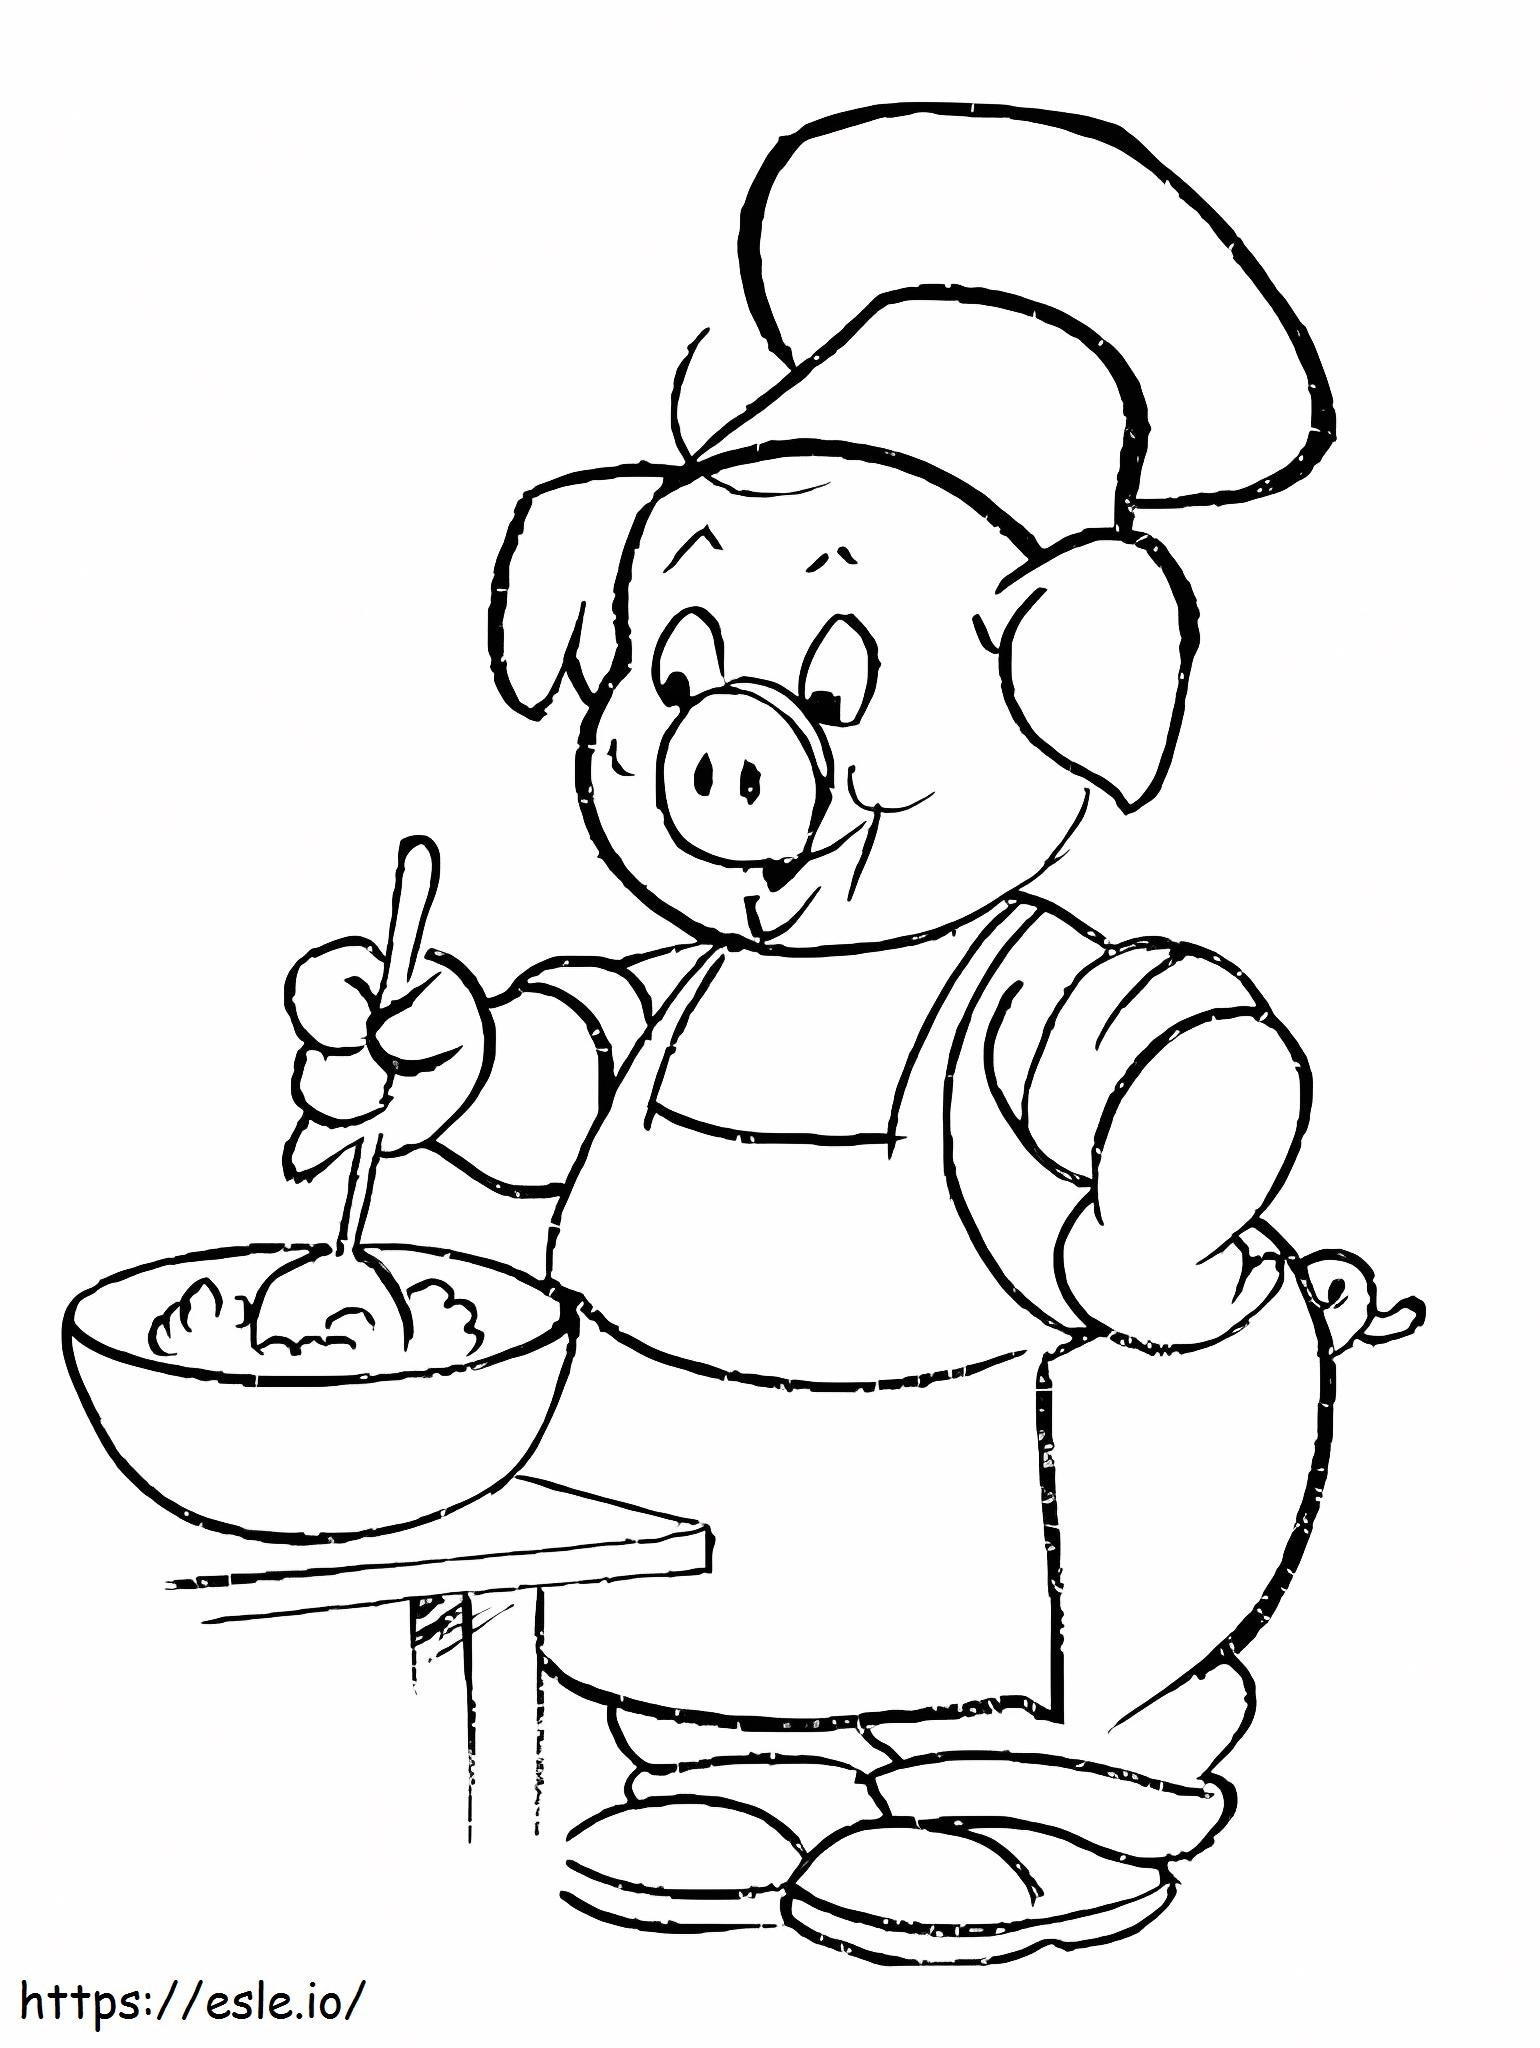 Pig Chef coloring page